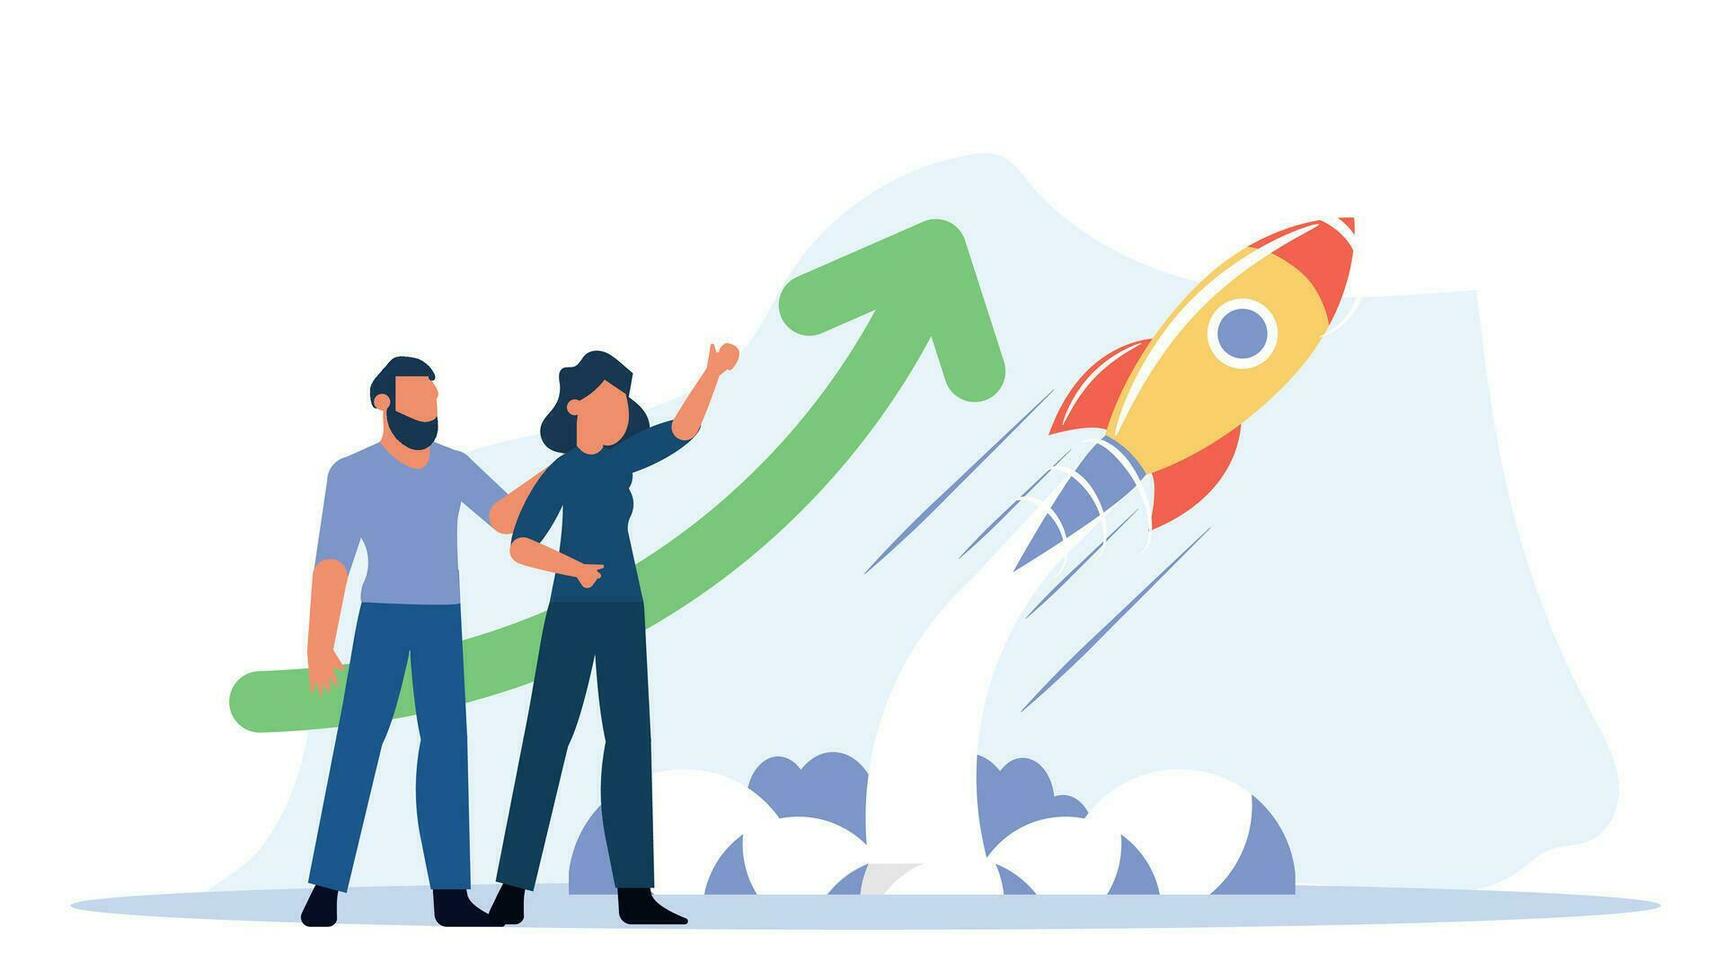 Rocket idea and a person of vision, a businessman can launch a startup, vector illustrating the concept of success through innovative strategies and teamwork, growth in the modern business landscape